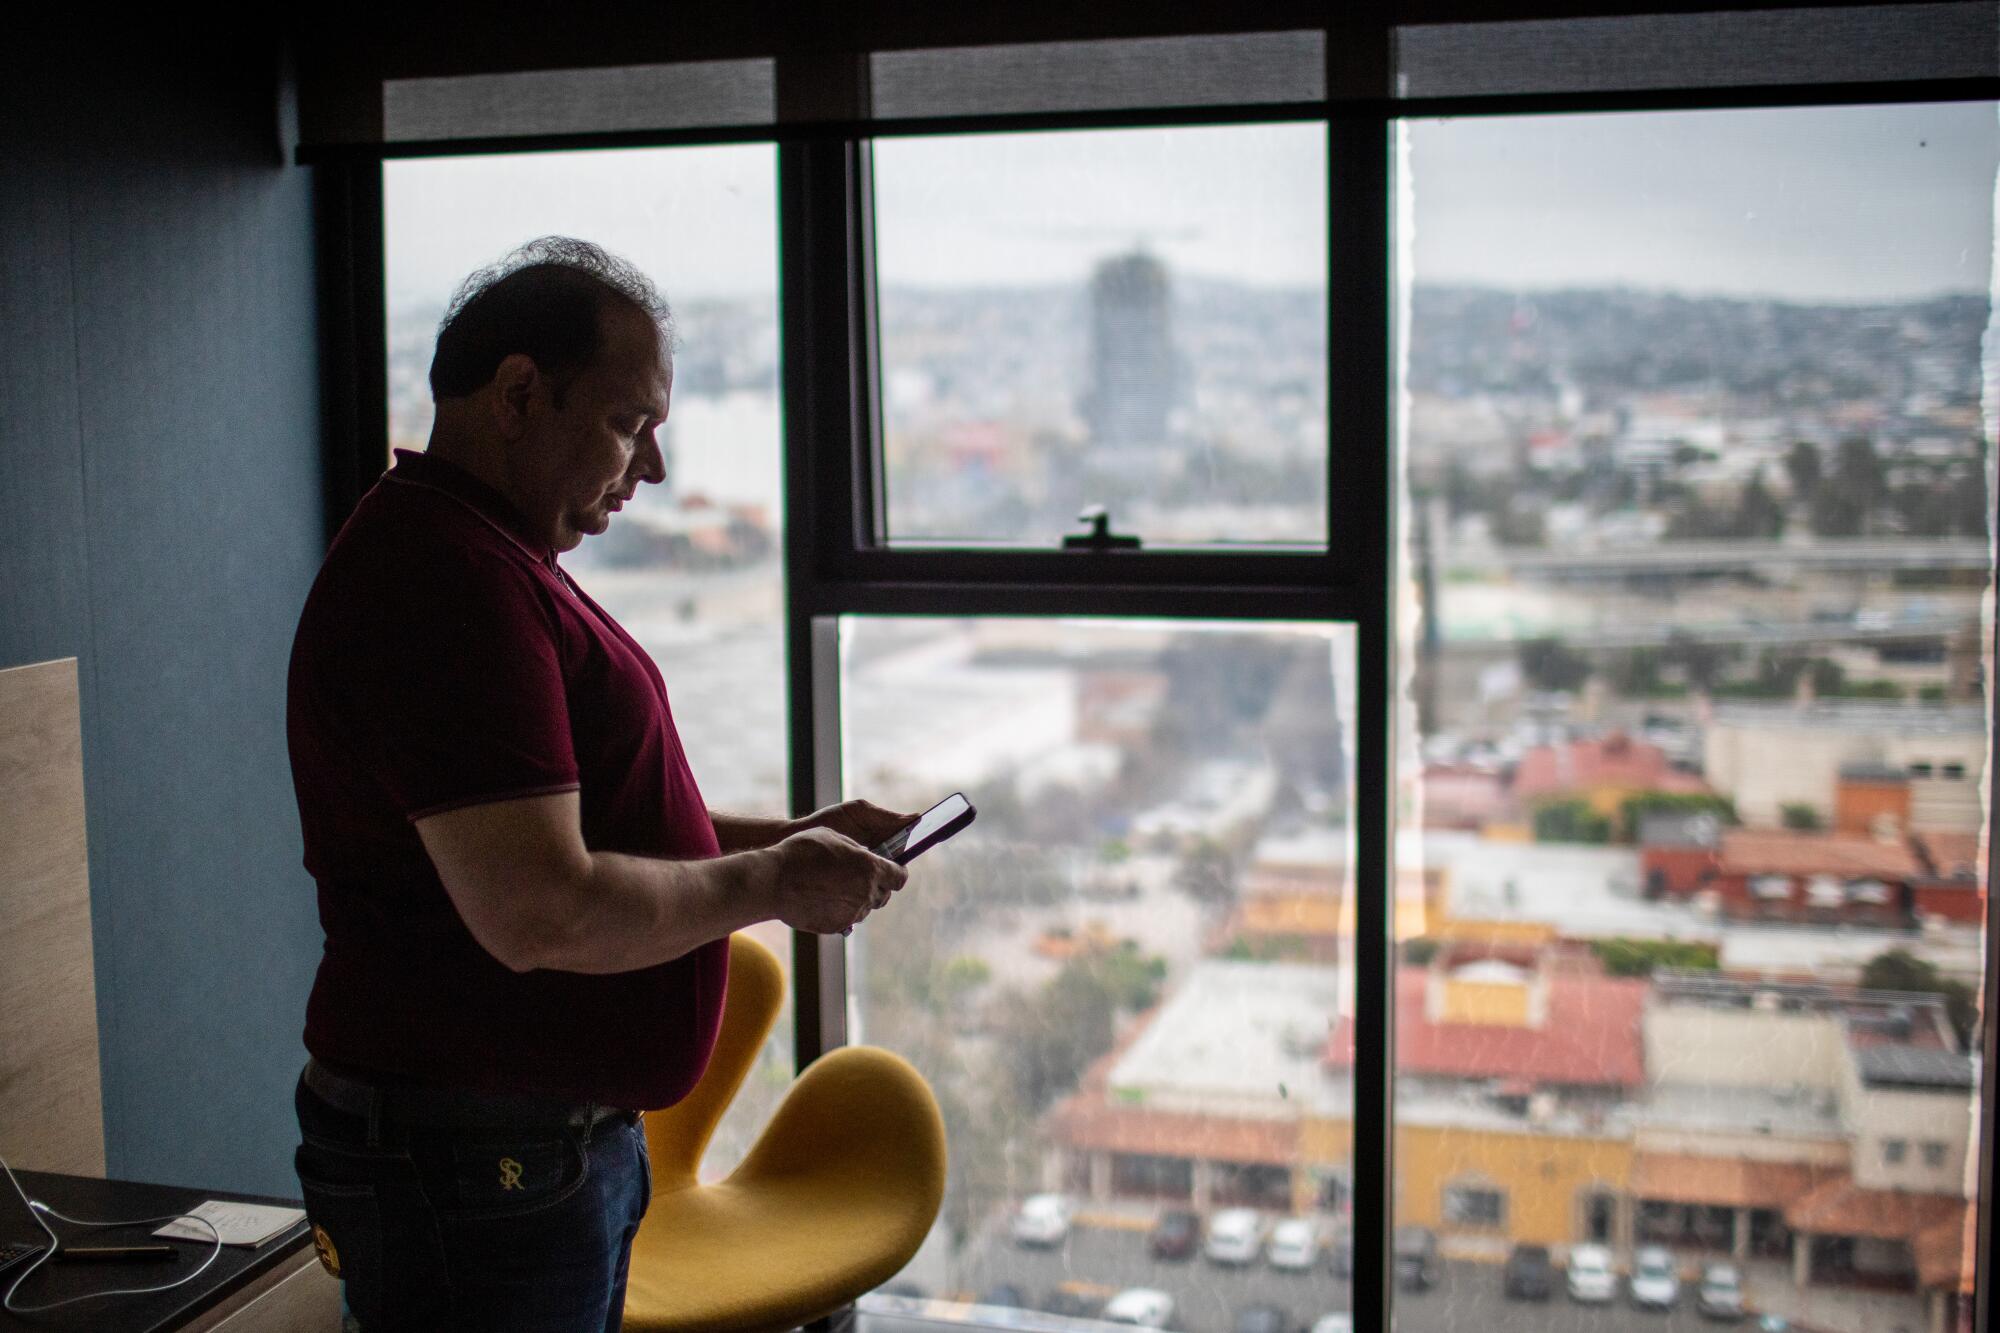 Dr. Pradyuman Singh checks his phone while standing next to a window in a room overlooking a cityscape.